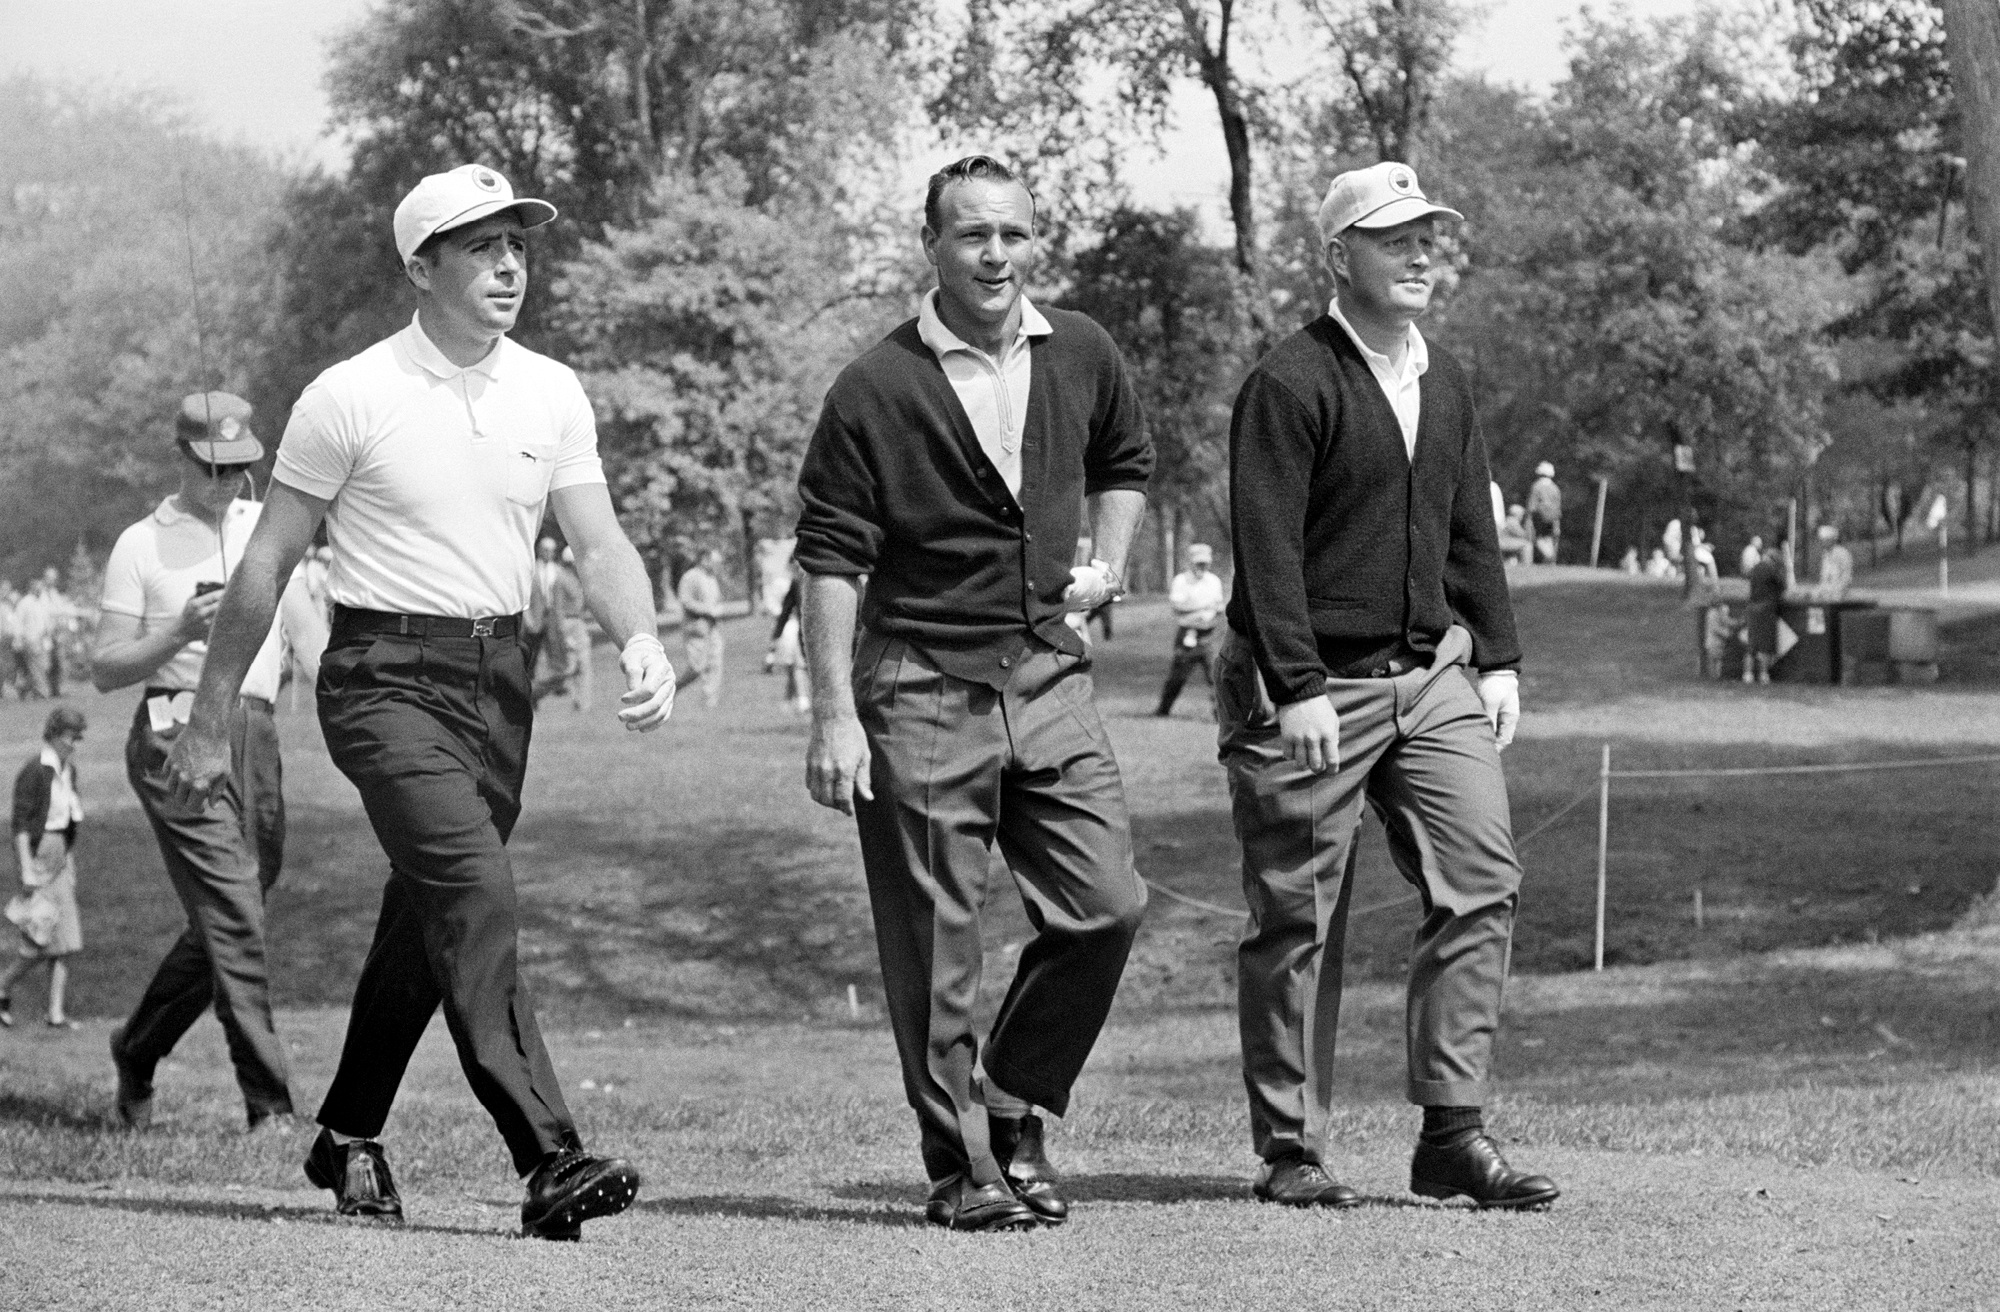 Player on the fairway with Arnold palmer and Jack Nicklaus.